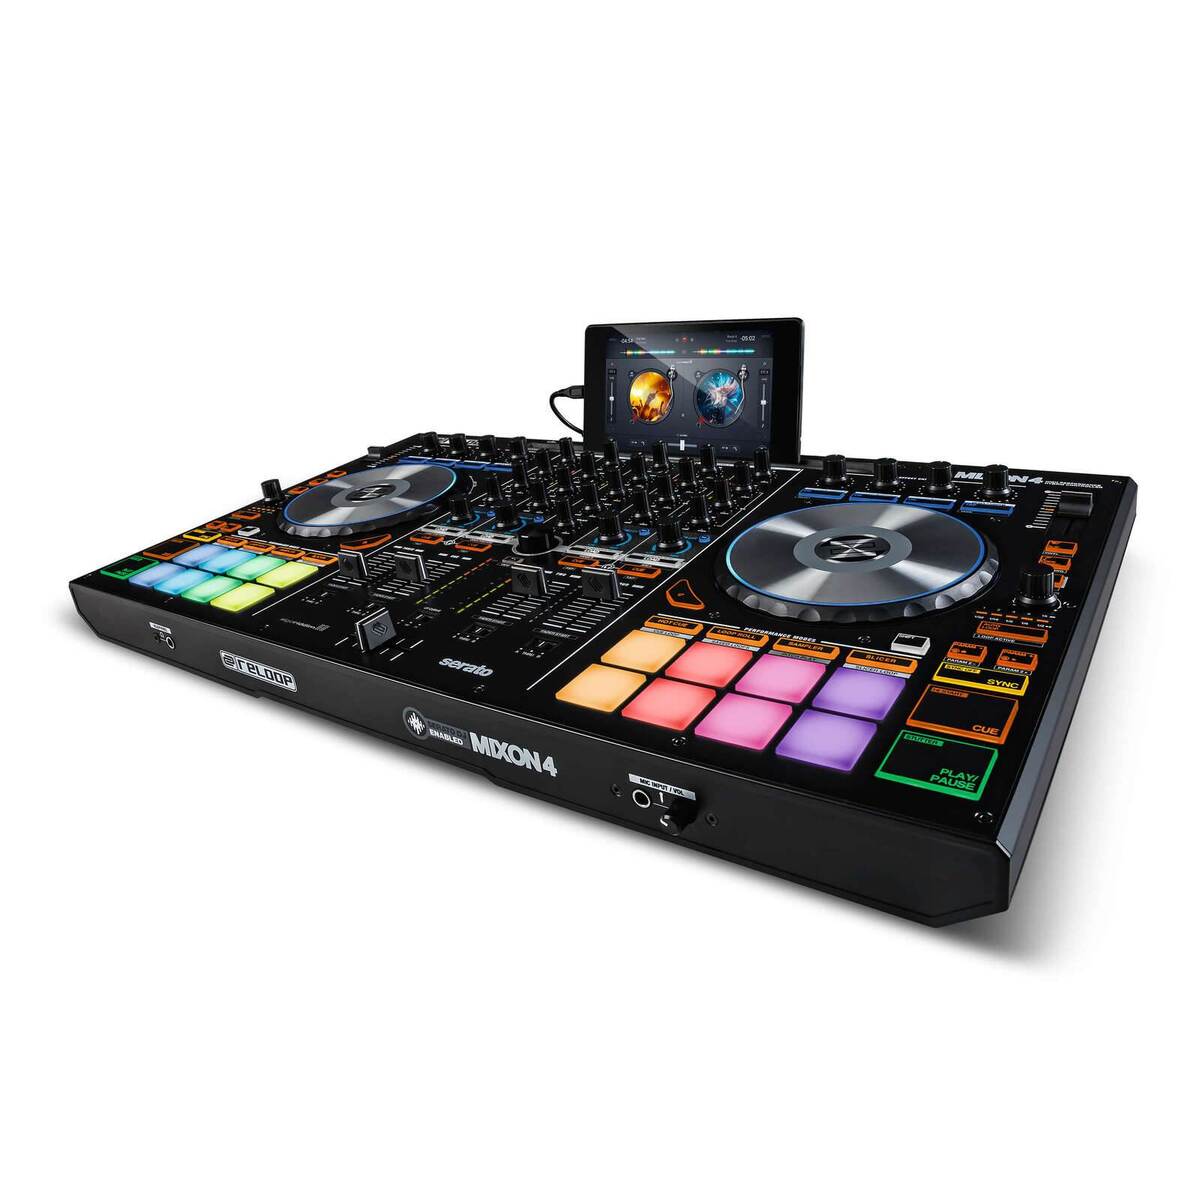 Reloop MIXON 4 Hybrid 4 Channel DJ Controller for Serato and djay